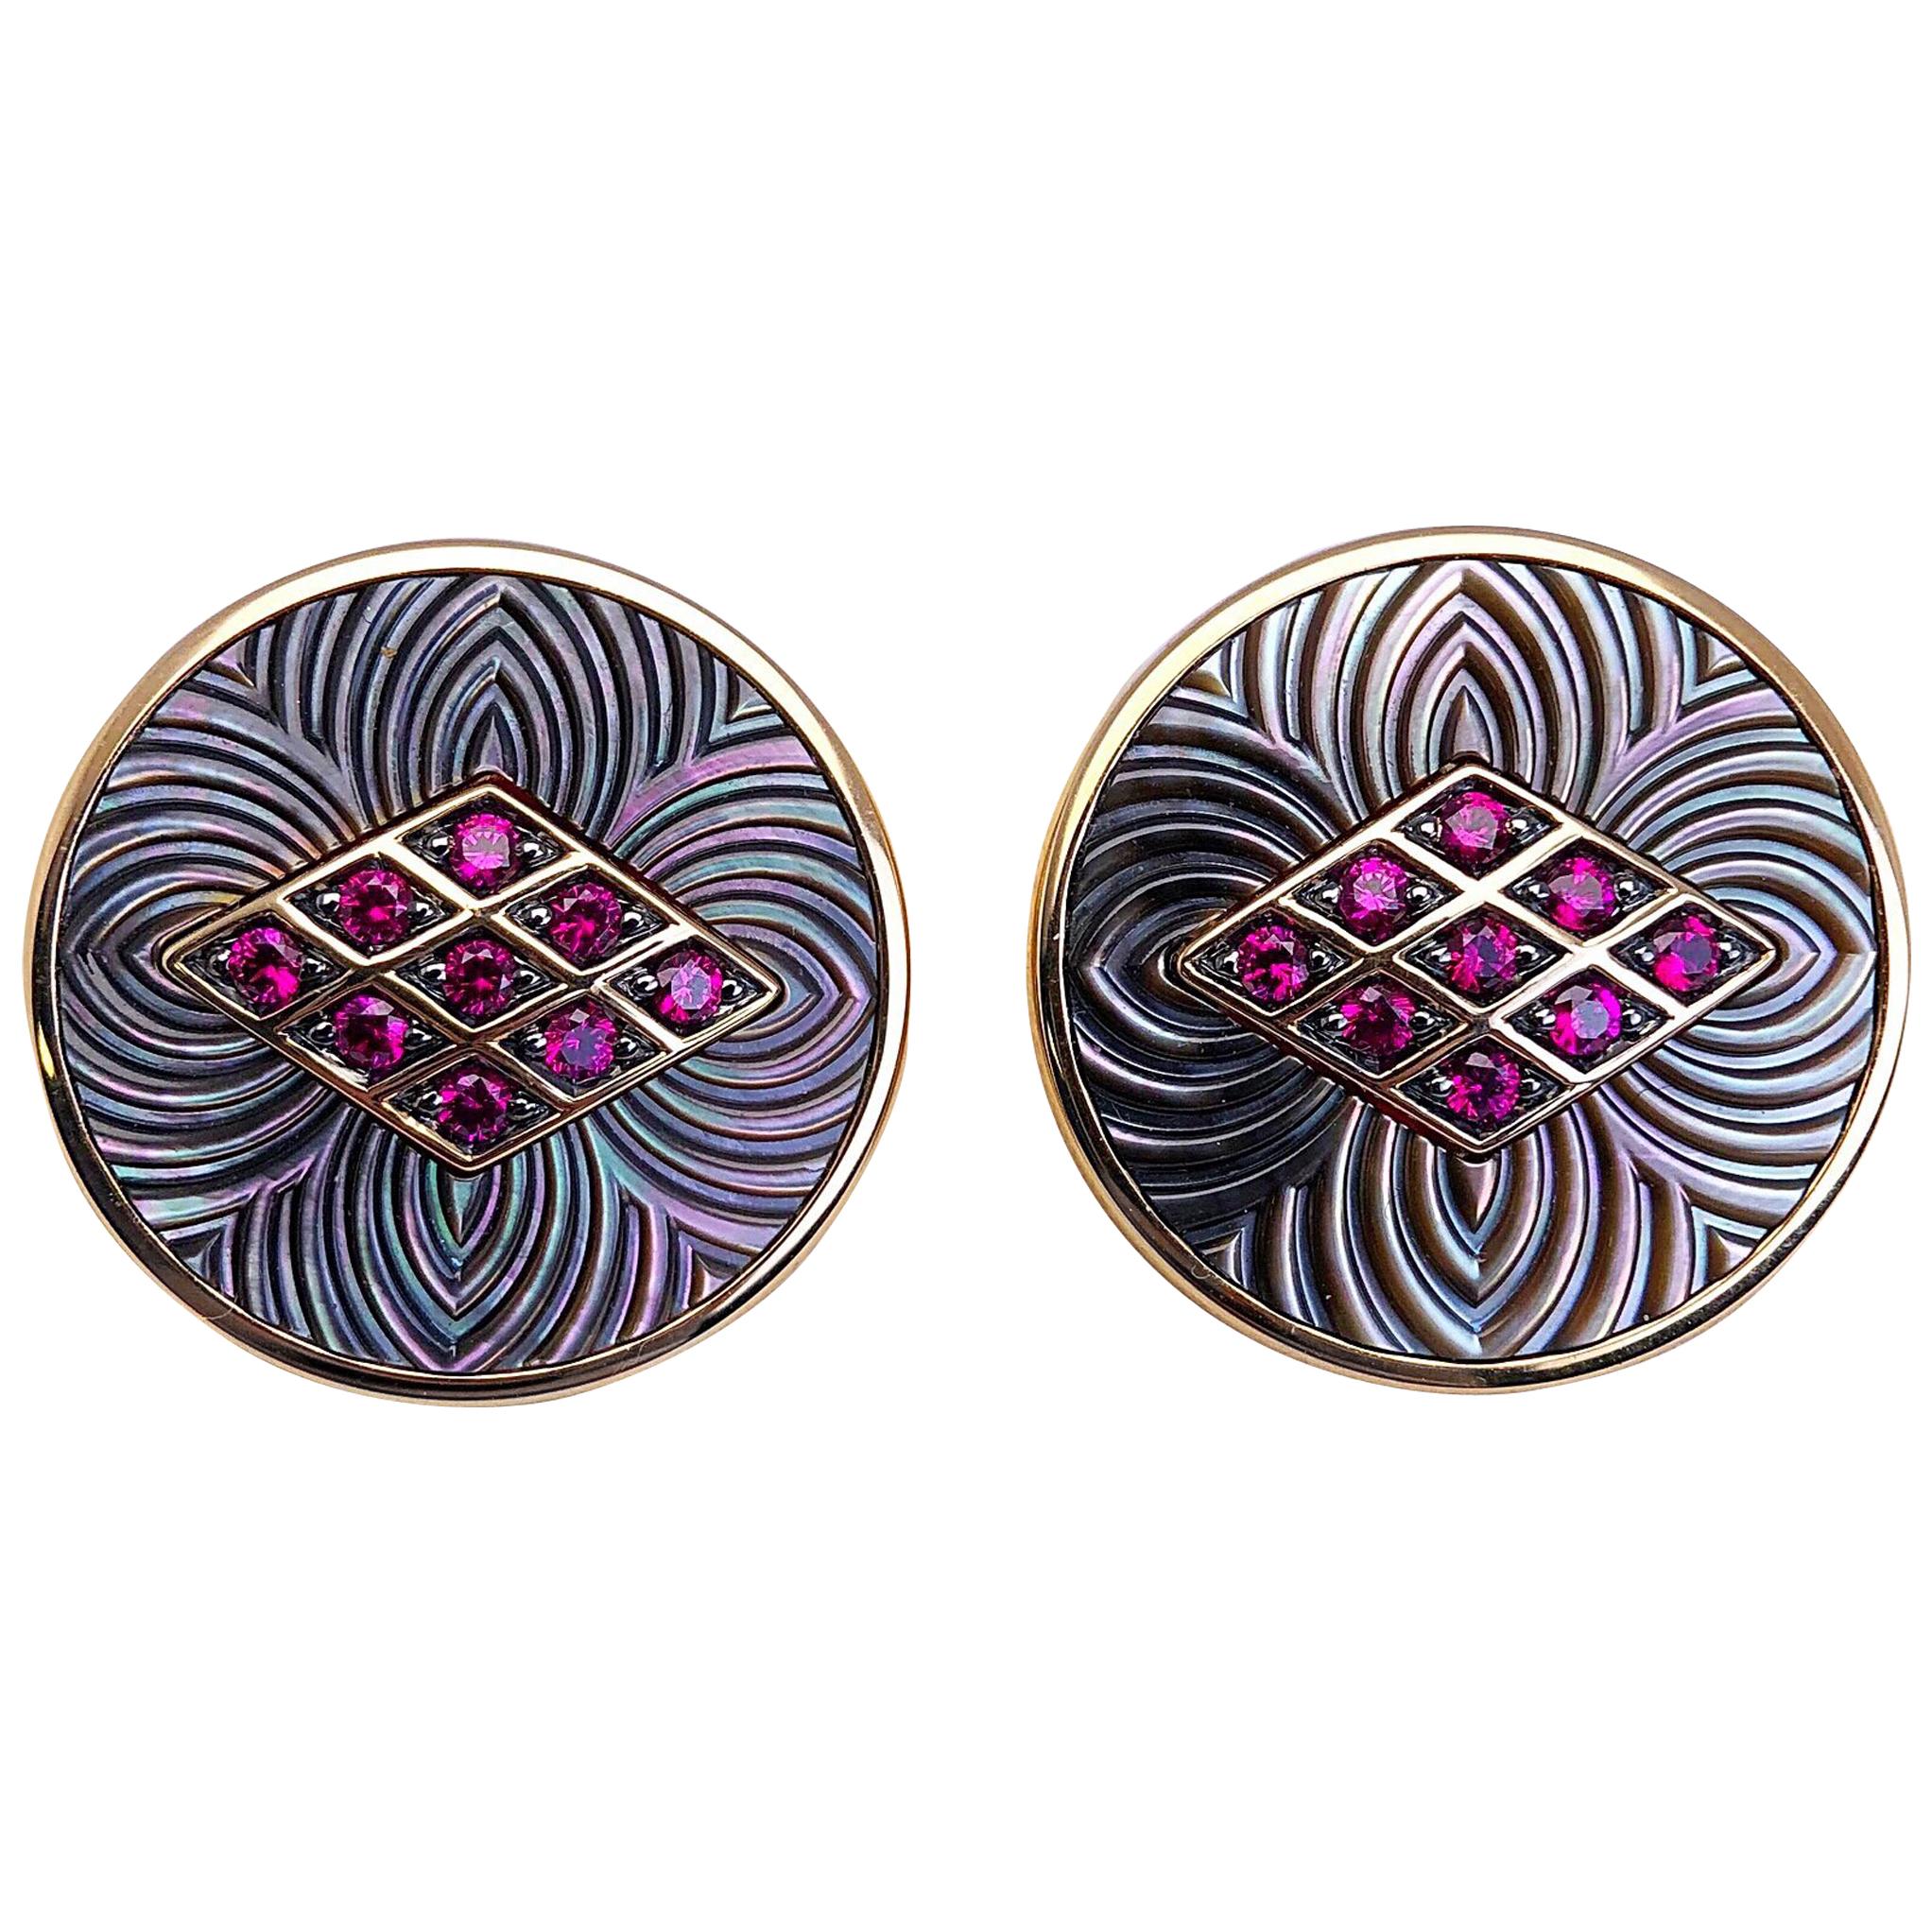 George Gero 18 Karat Gold .44 Carat Ruby and Black Mother of Pearl Cuff Links For Sale